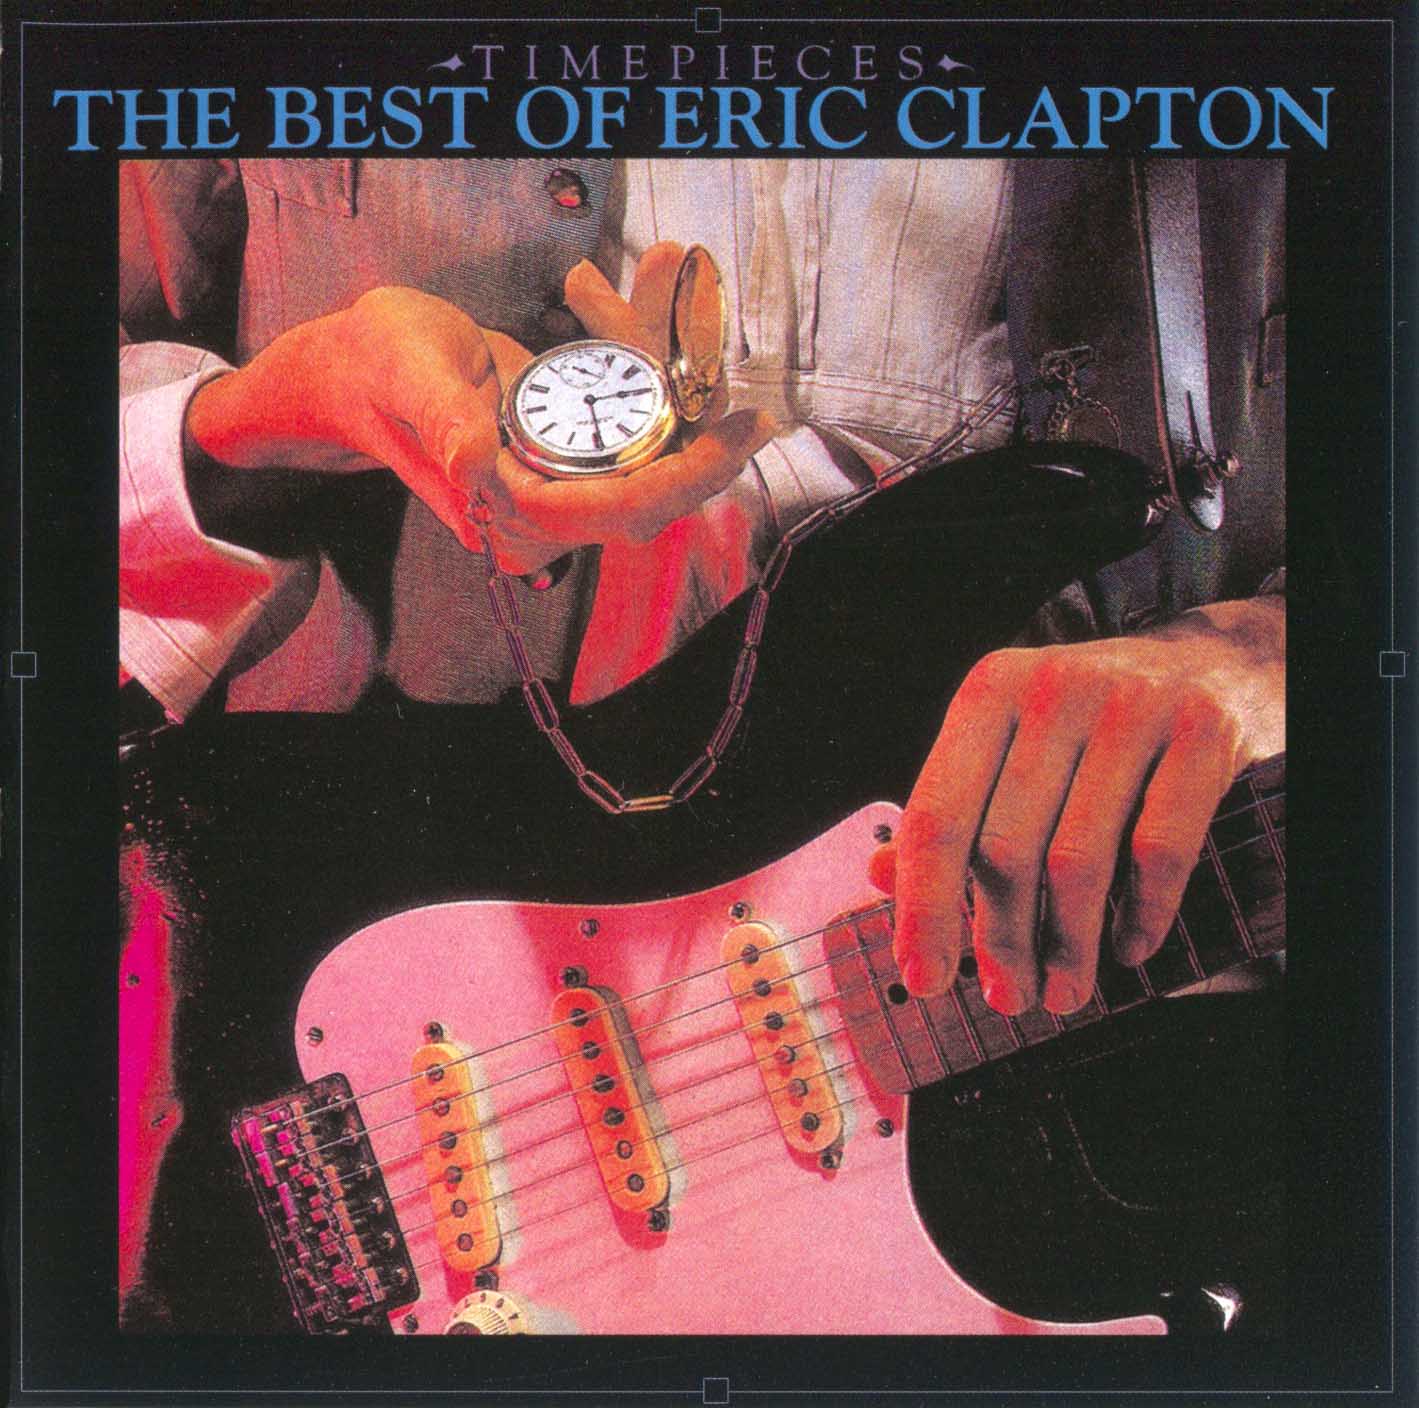 Eric Clapton - Time Pieces: The Best Of Eric Clapton (1982) [Audio Fidelity ‘2014] {SACD ISO + FLAC 24bit/88.2kHz}